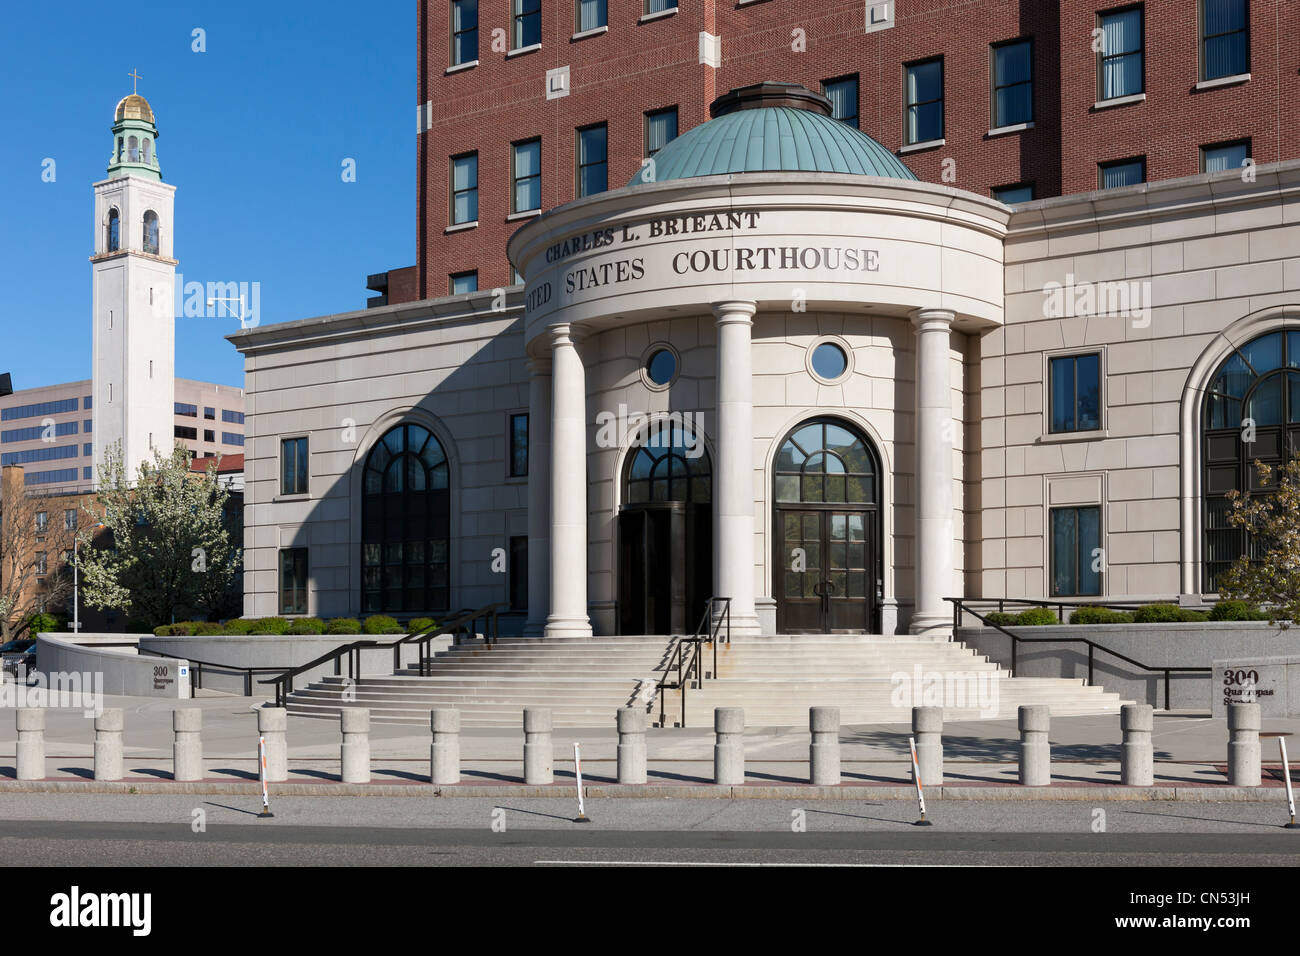 Die Charles L. Brieant United States Federal Building und Gerichtsgebäude (Southern District of New York) in White Plains, New York. Stockfoto